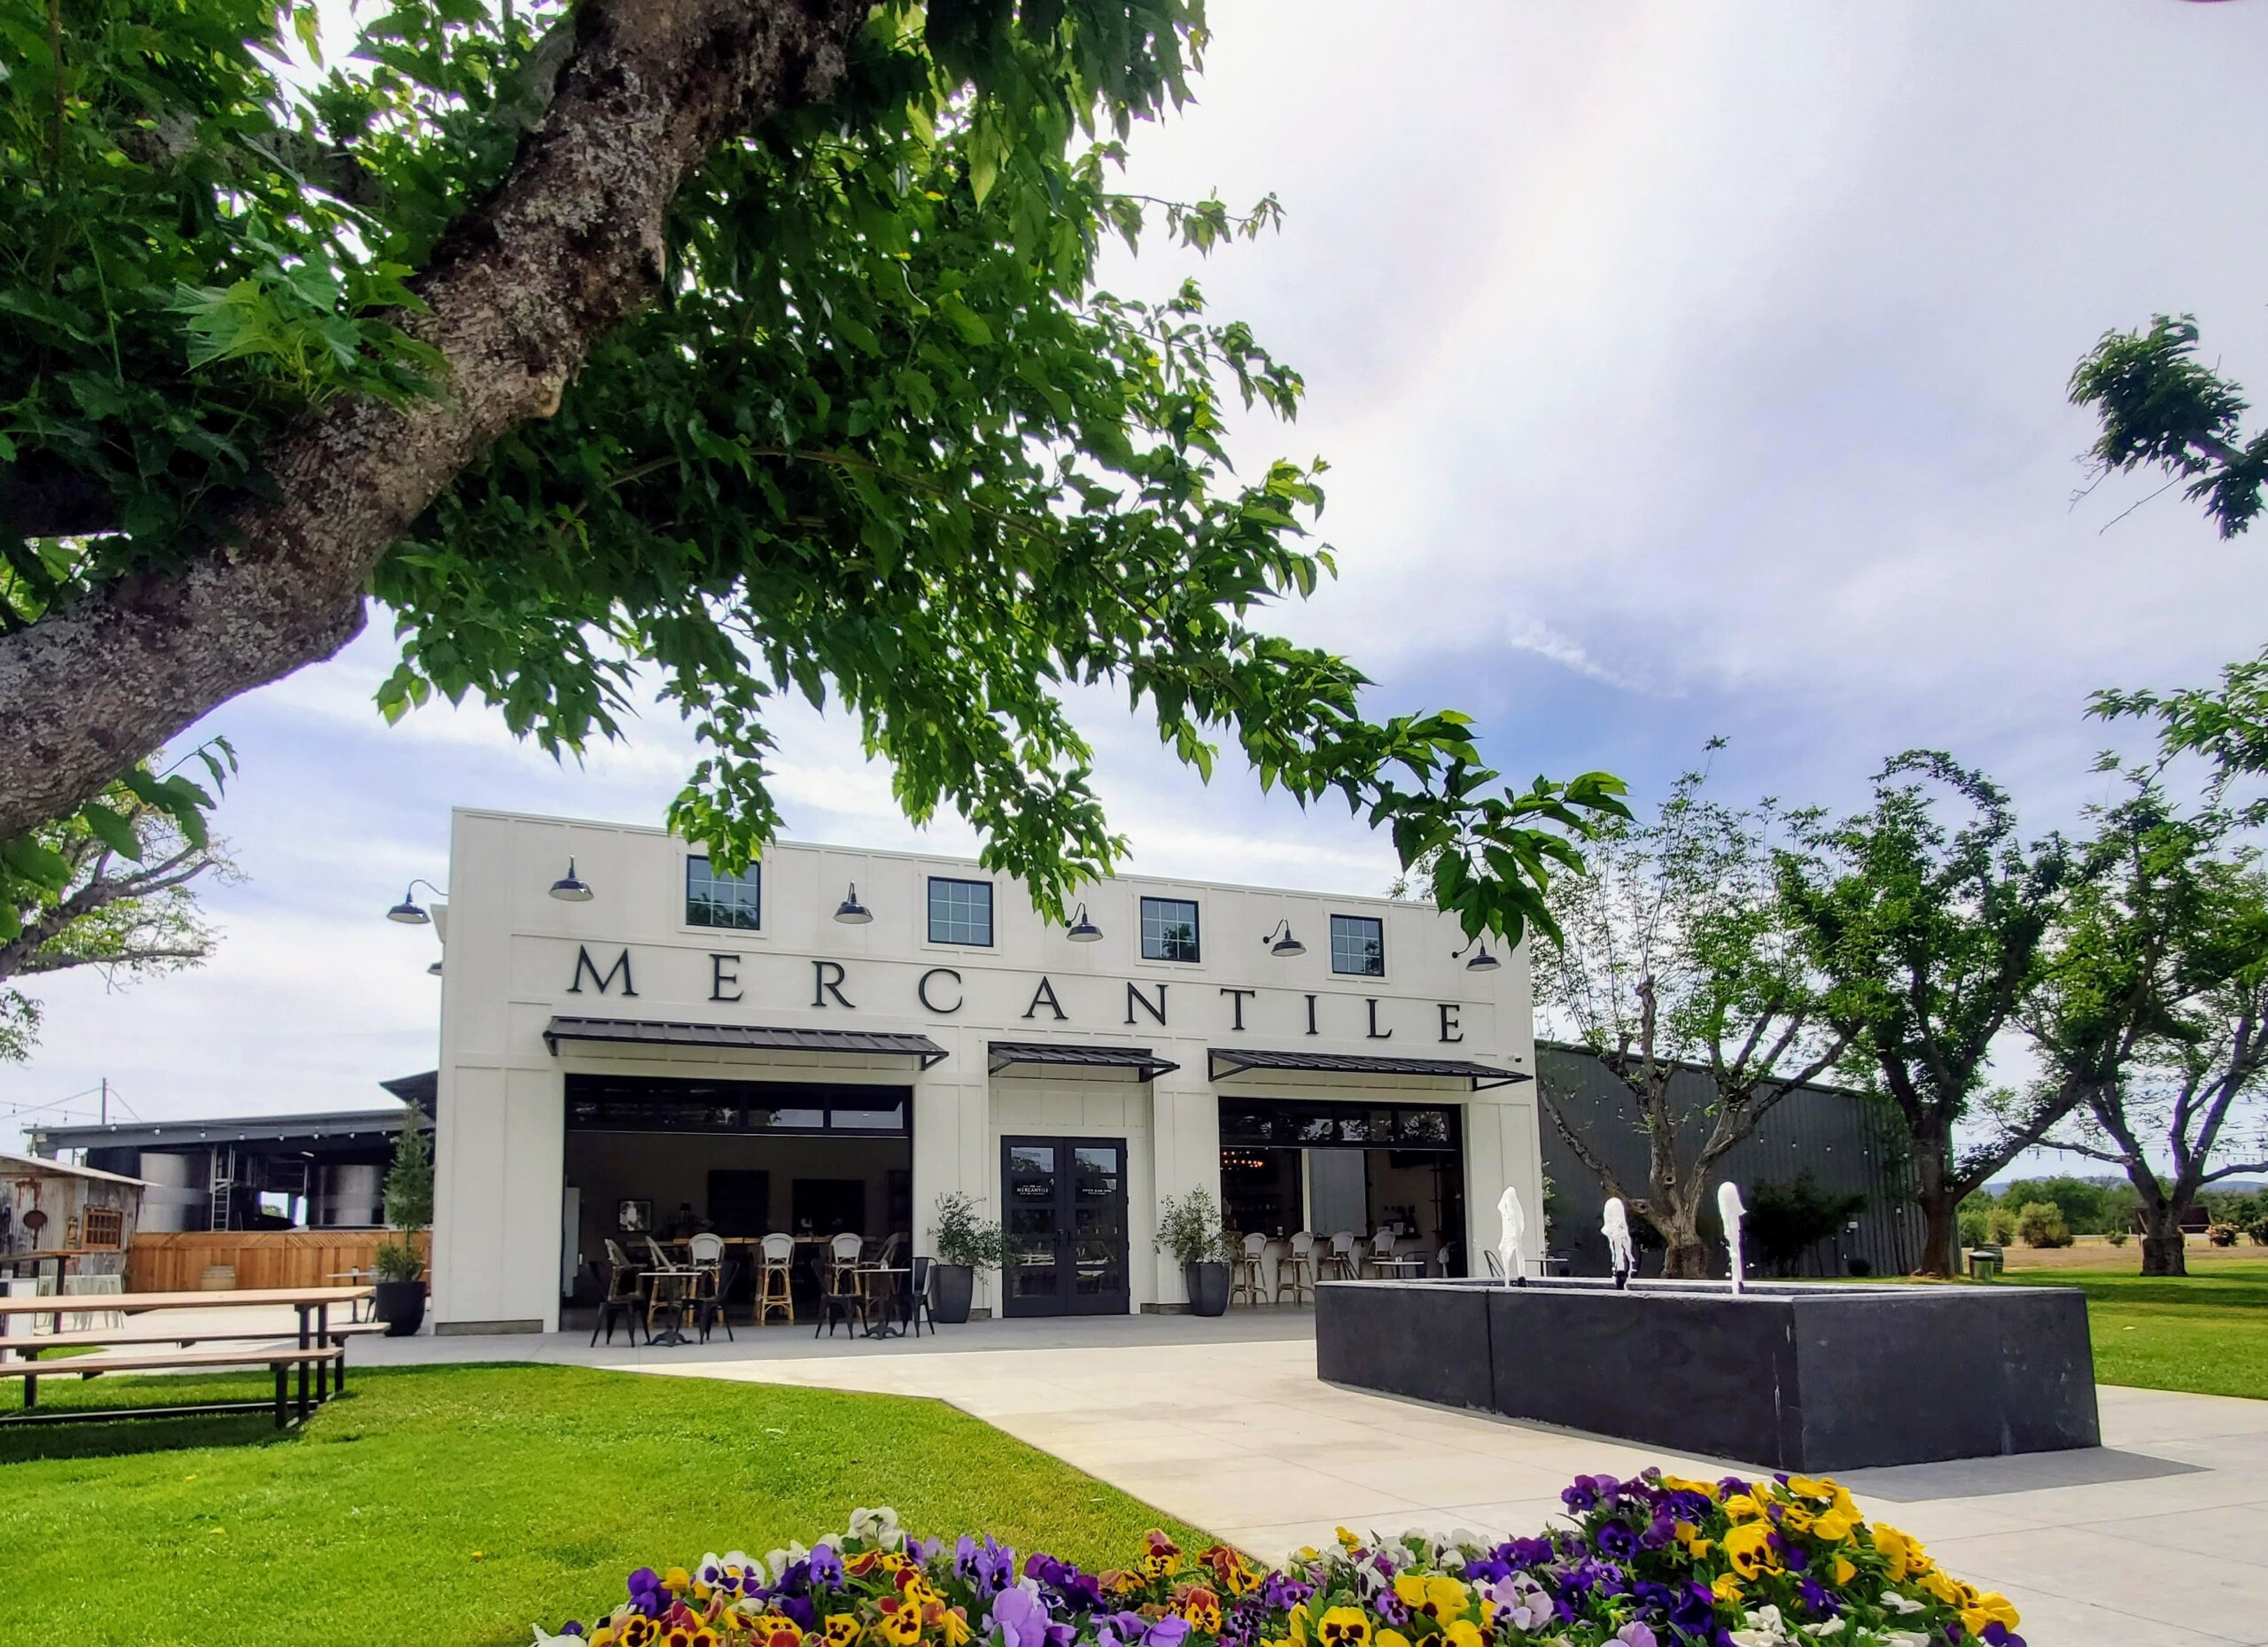 Mercantile an exceptional place